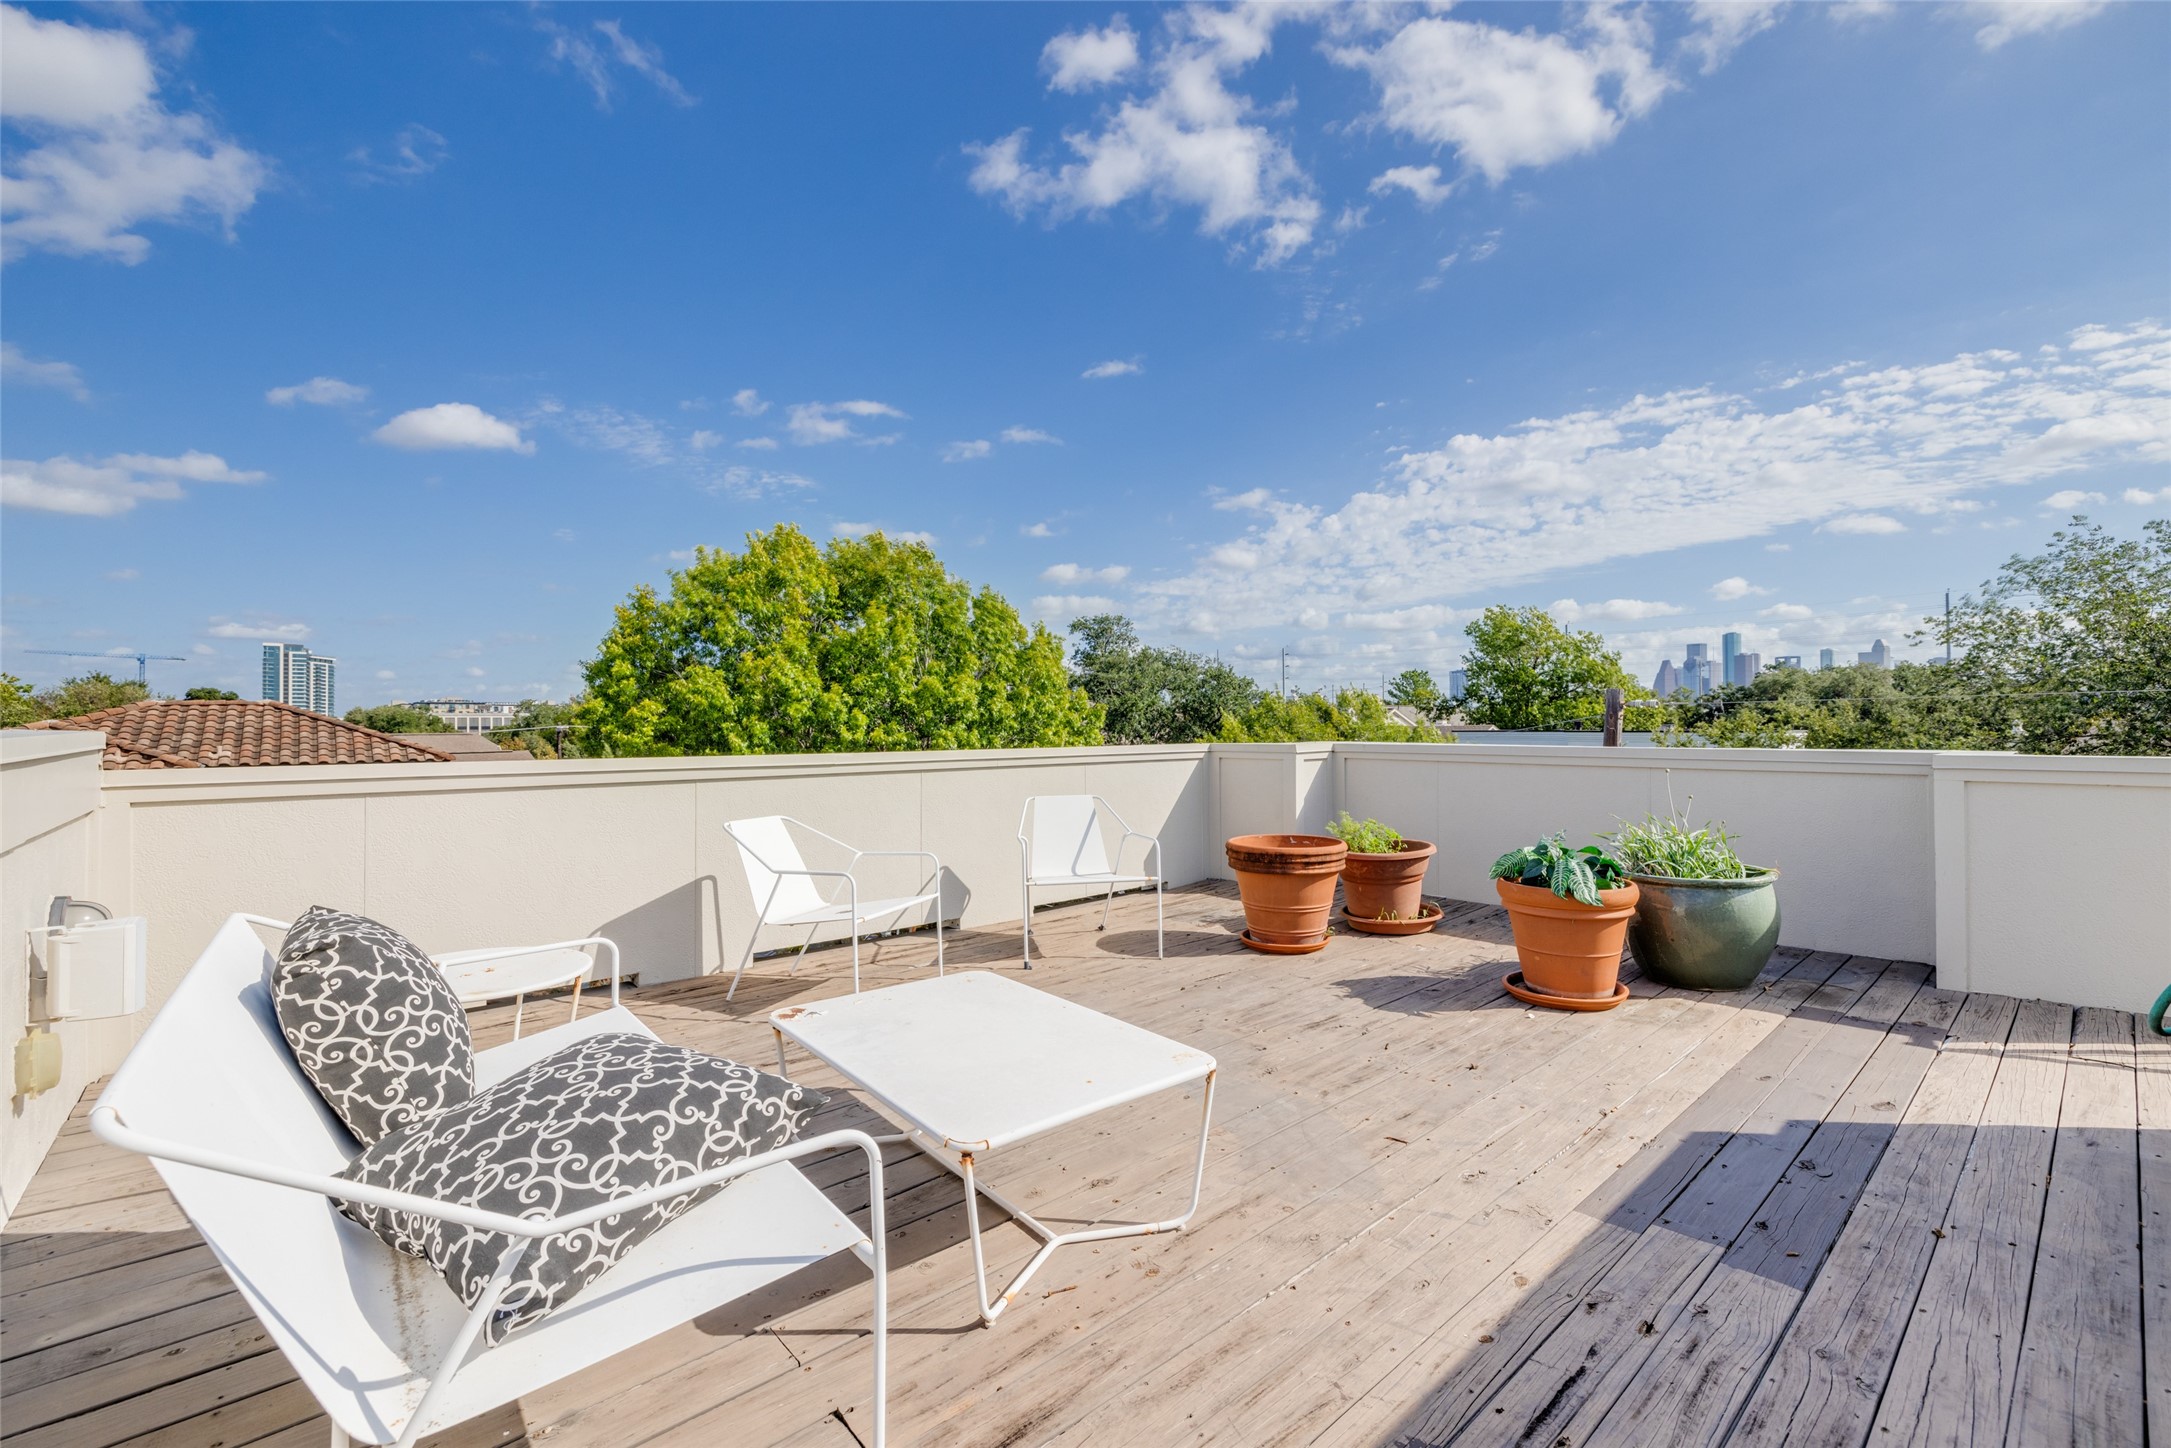 Enjoy the wonderful panoramic views of Houston in this peaceful huge rooftop terrace, gas & water connections, decorative lighting, wood deck replaced 2017